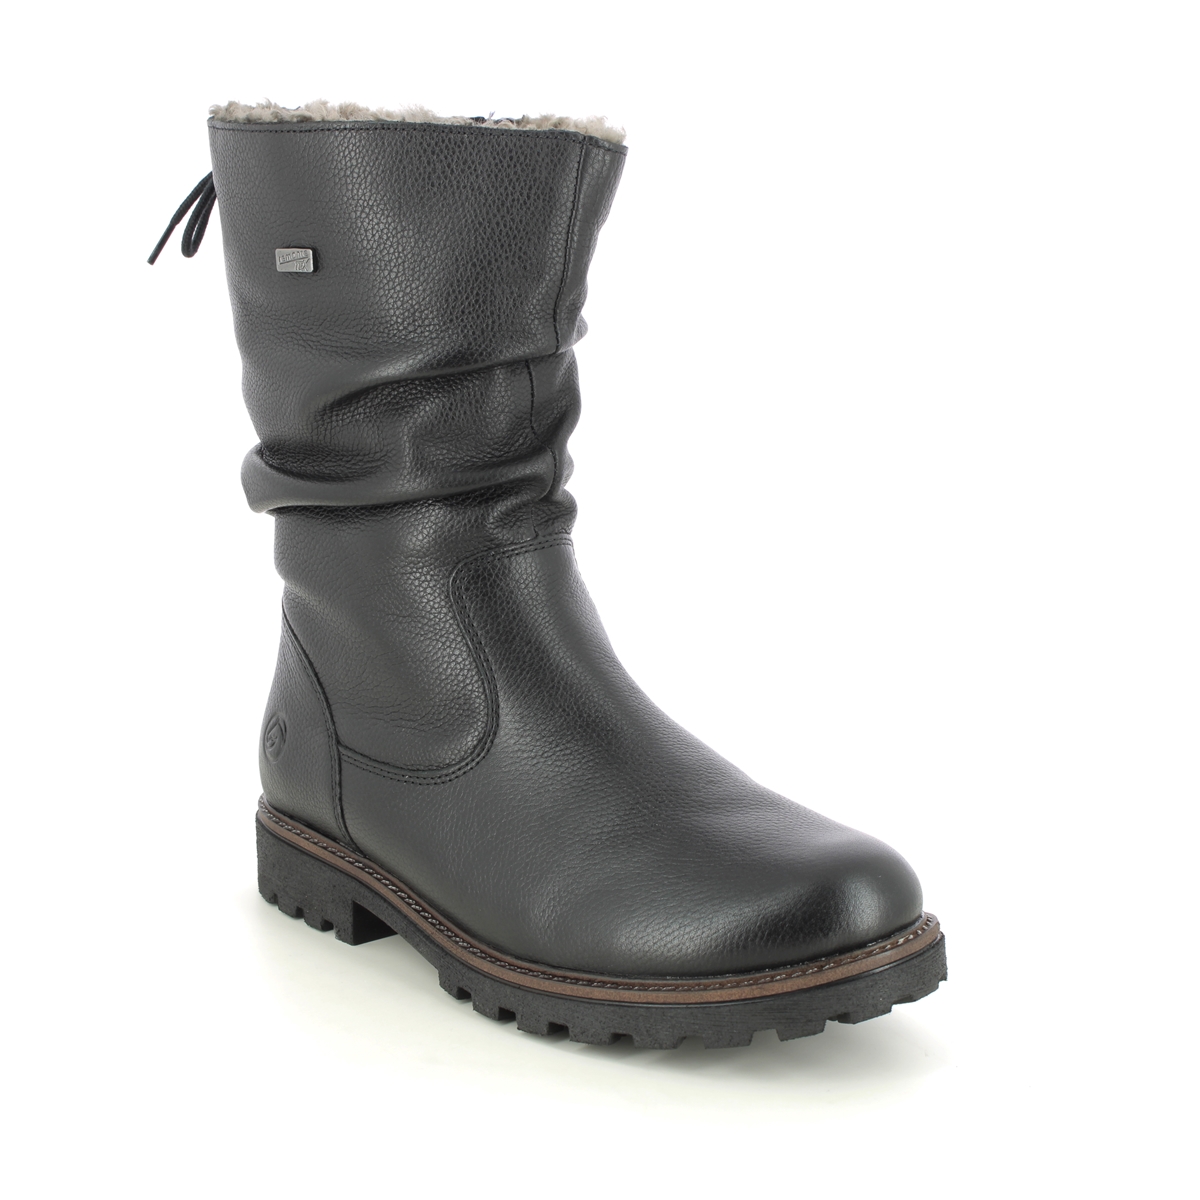 Remonte Brand Tex Sheep Black Leather Womens Mid Calf Boots D8477-01 In Size 39 In Plain Black Leather